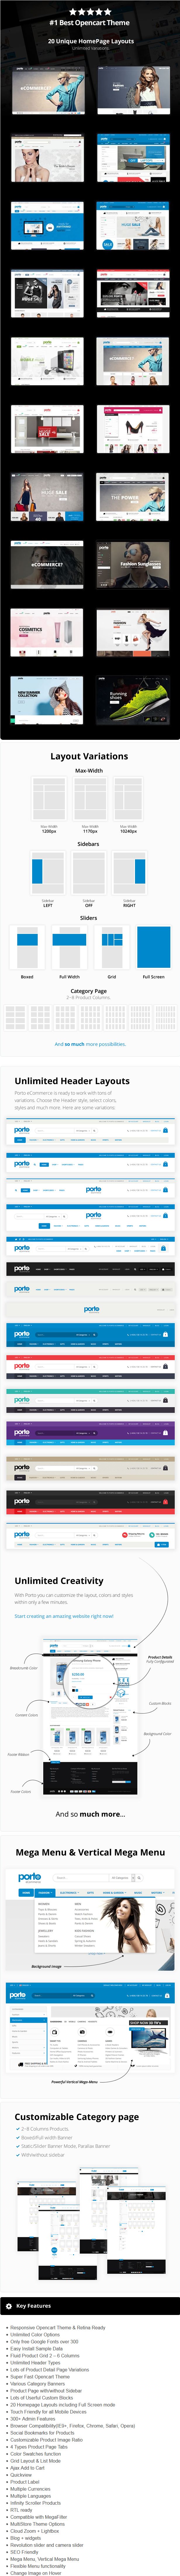 Porto_-_Ultimate_Responsive_Opencart_Theme_by_obest_ThemeForest_-_2017-03-25_17.12.31.jpg